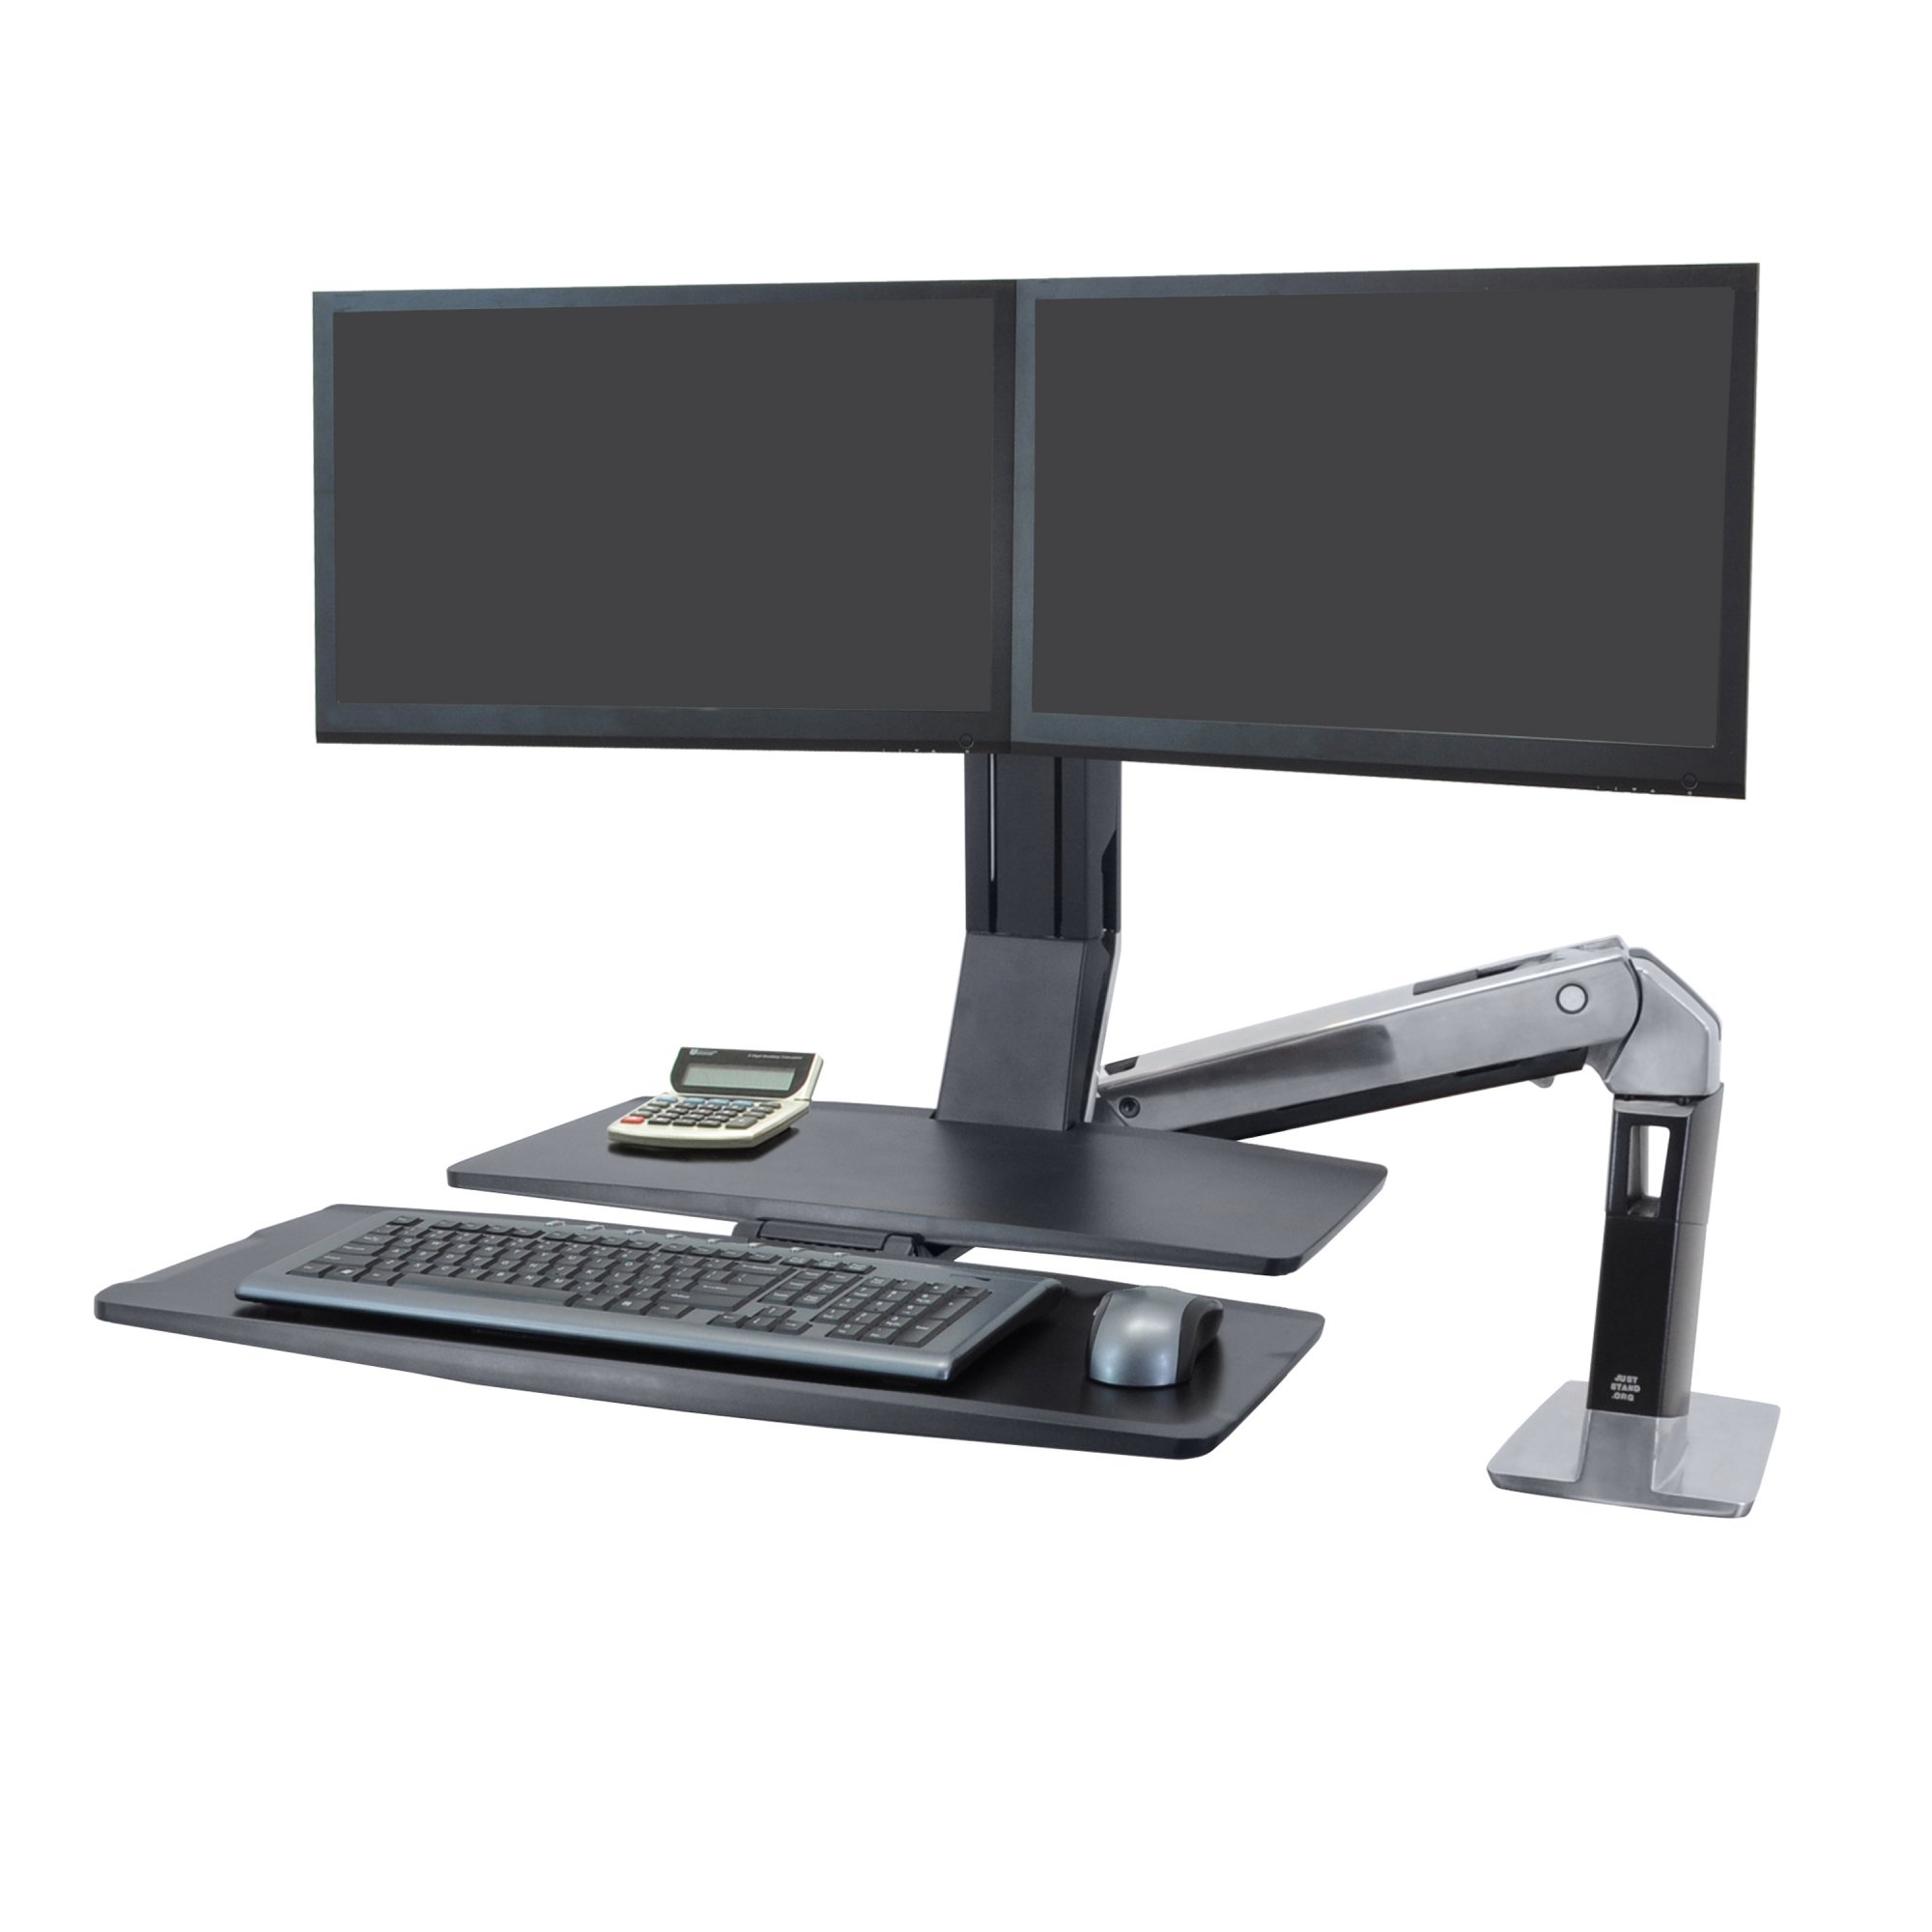 Ergotron 24-316-026 WorkFit-A, Dual Monitor with Worksurface